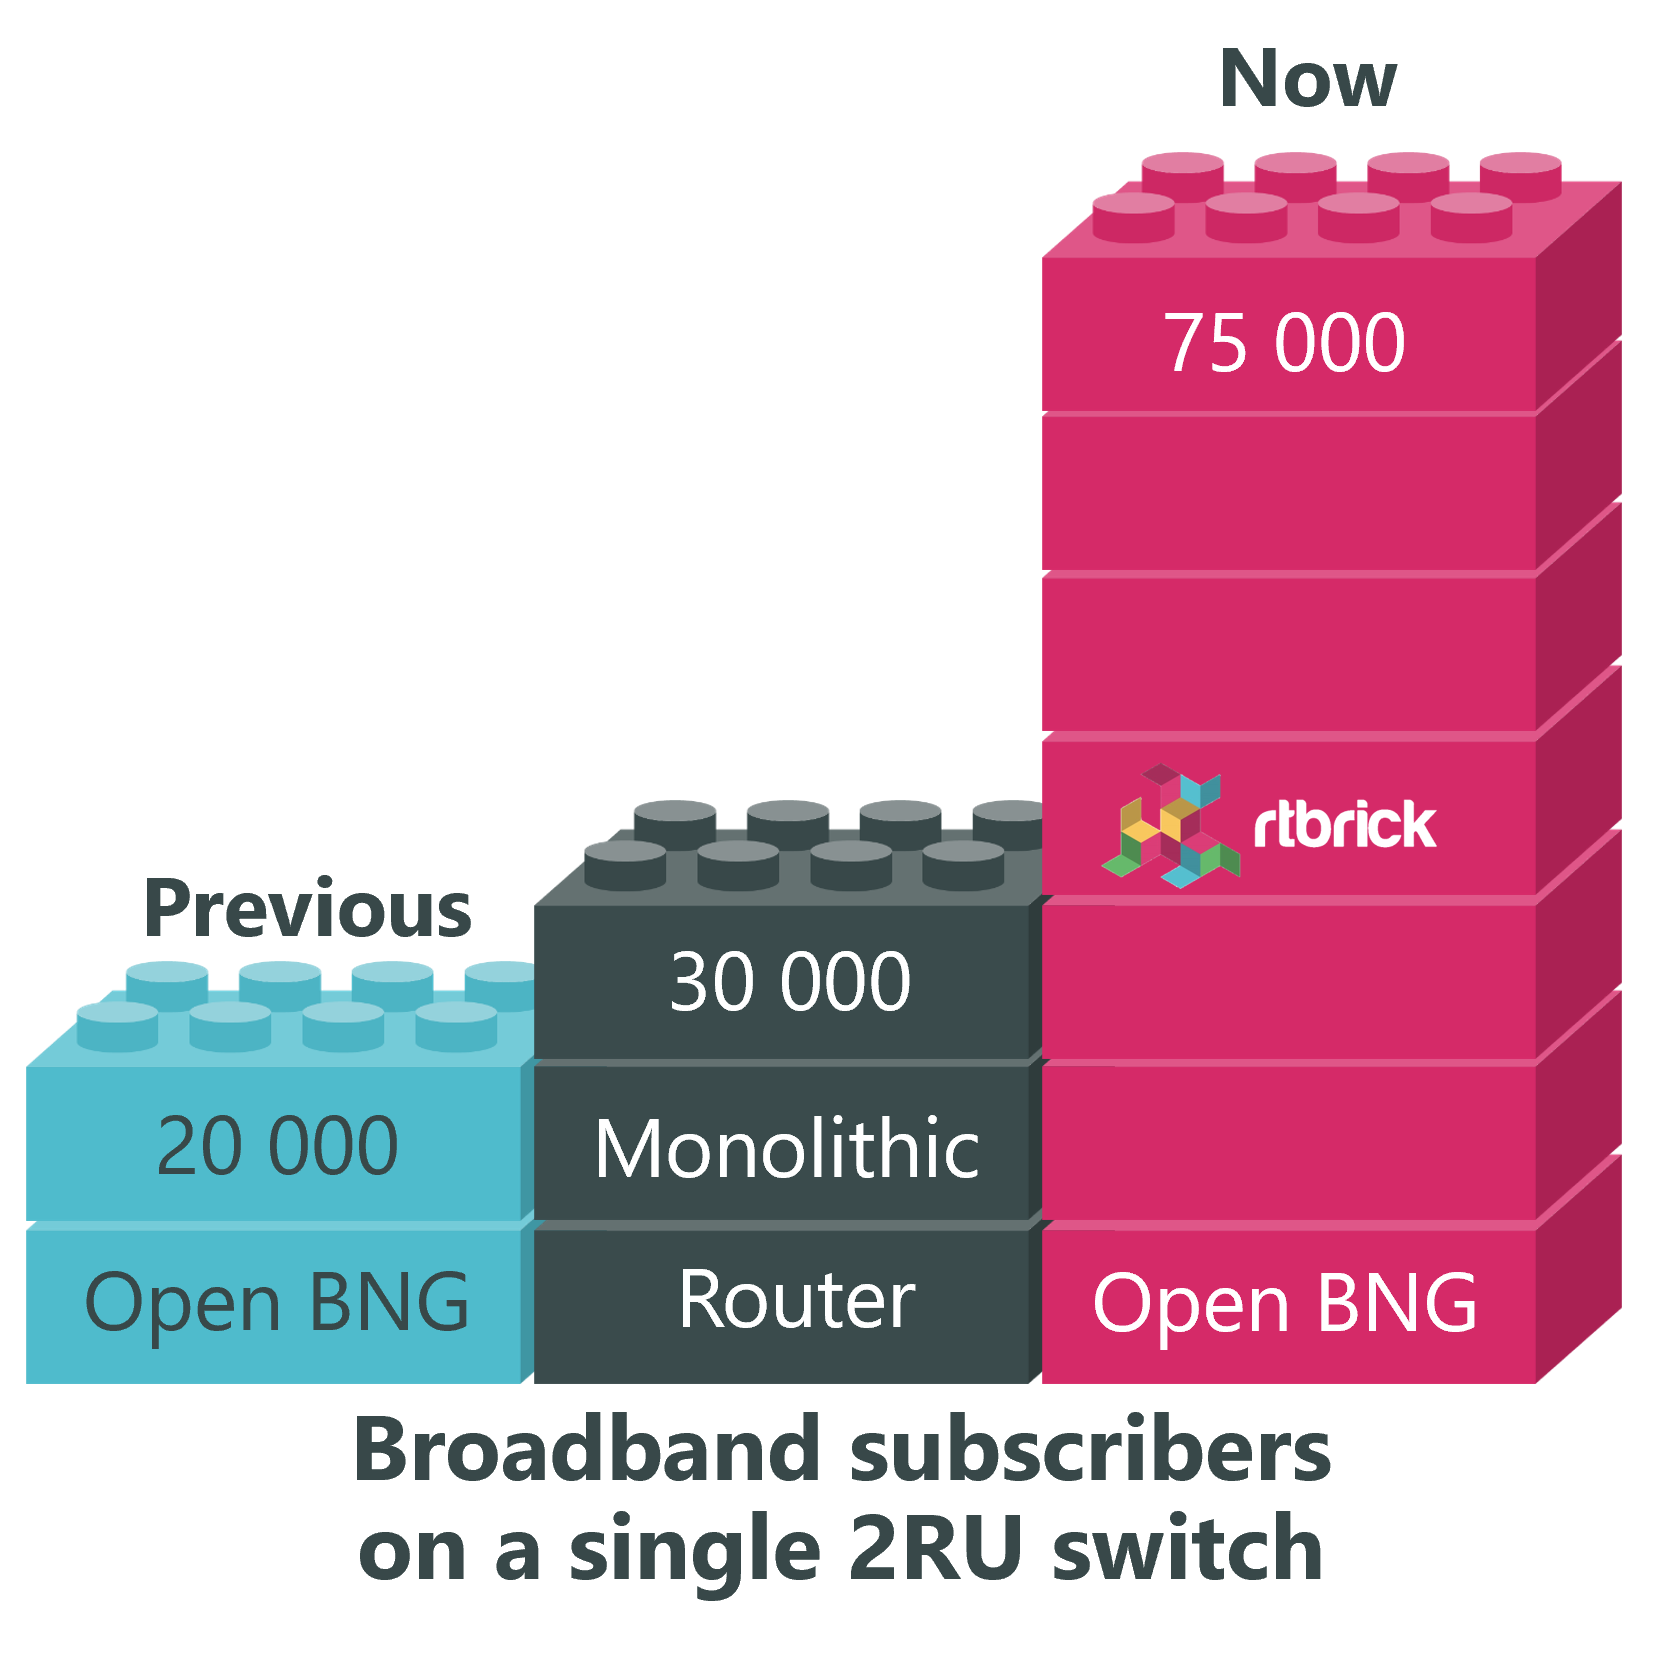 RtBrick More Than Doubles Number of Subscribers that can be Serviced by Single Open Switch